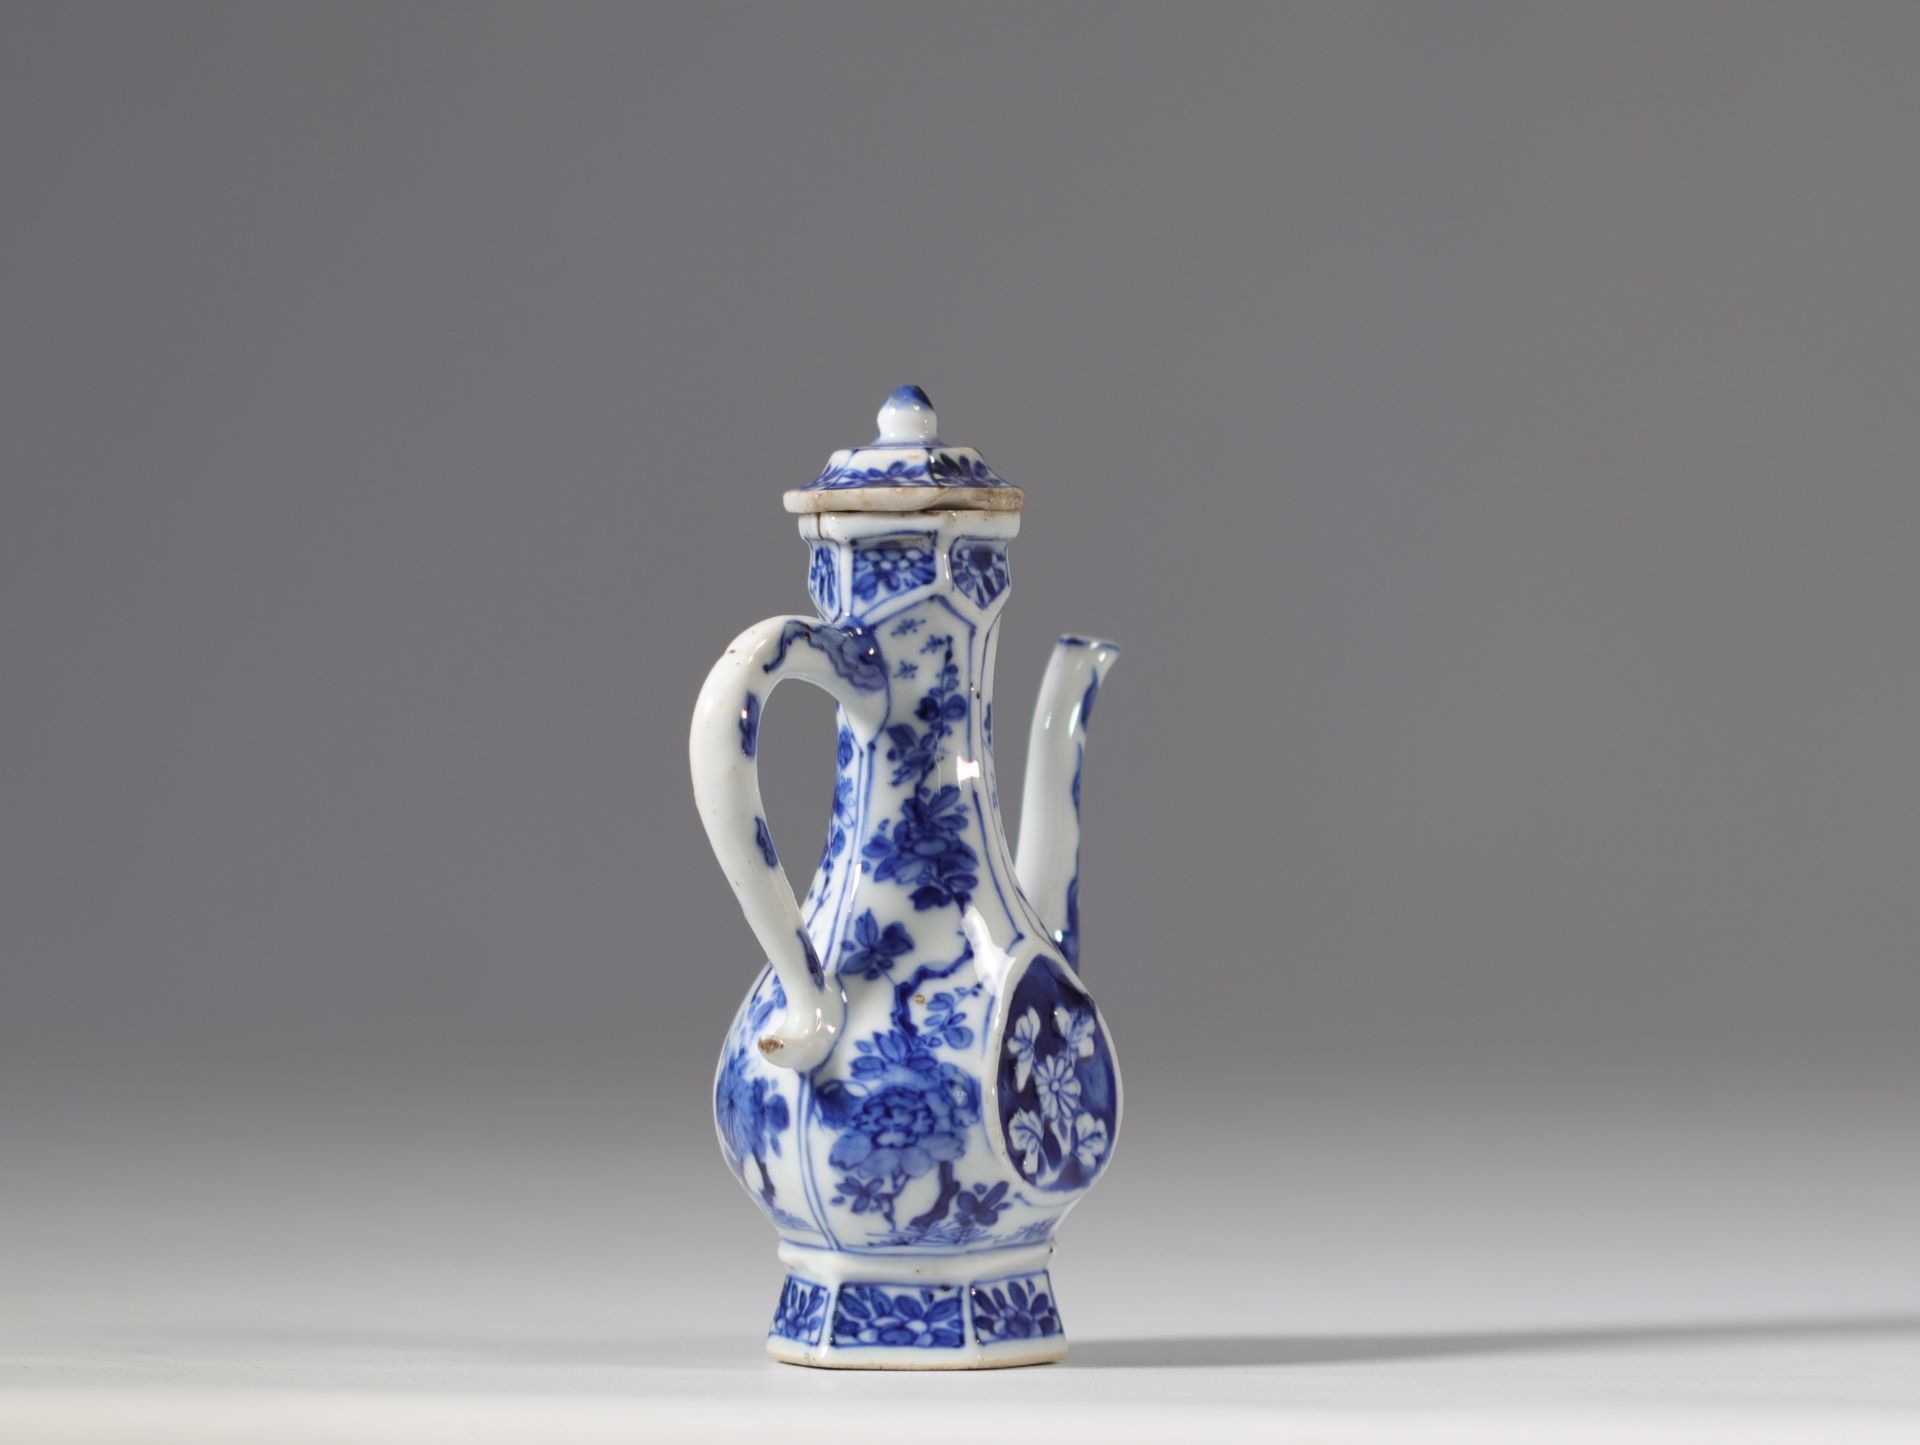 White and blue porcelain teapot with floral decoration from the 17th century Kangxi - Image 3 of 4